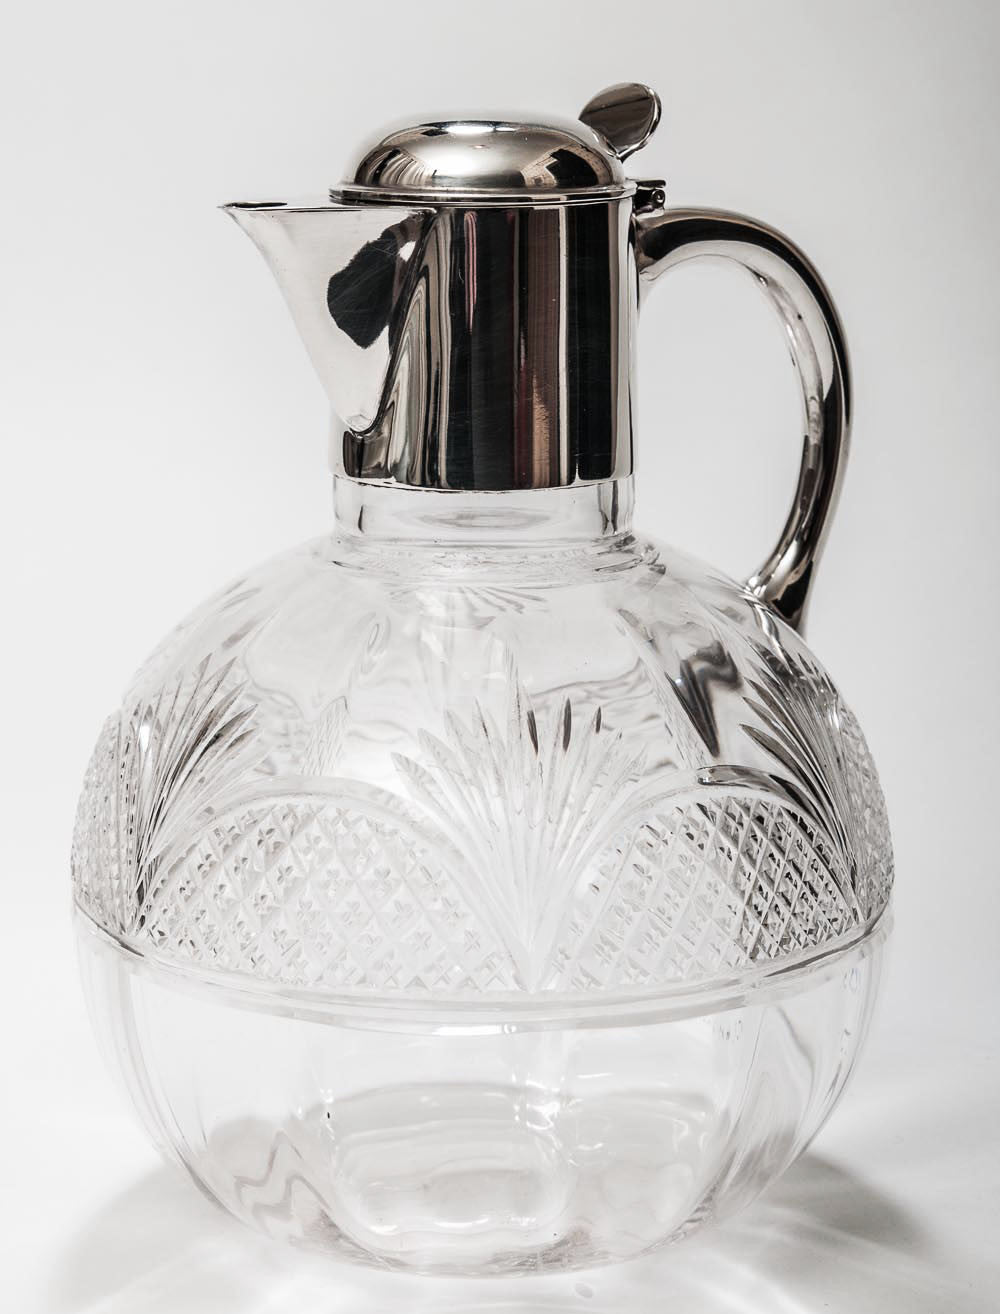 A Victorian Antique Cut Glass Claret Jug With Hallmarked London 1891 Silver Mount (Code 8006) - Blue Cherry Antiques - 1